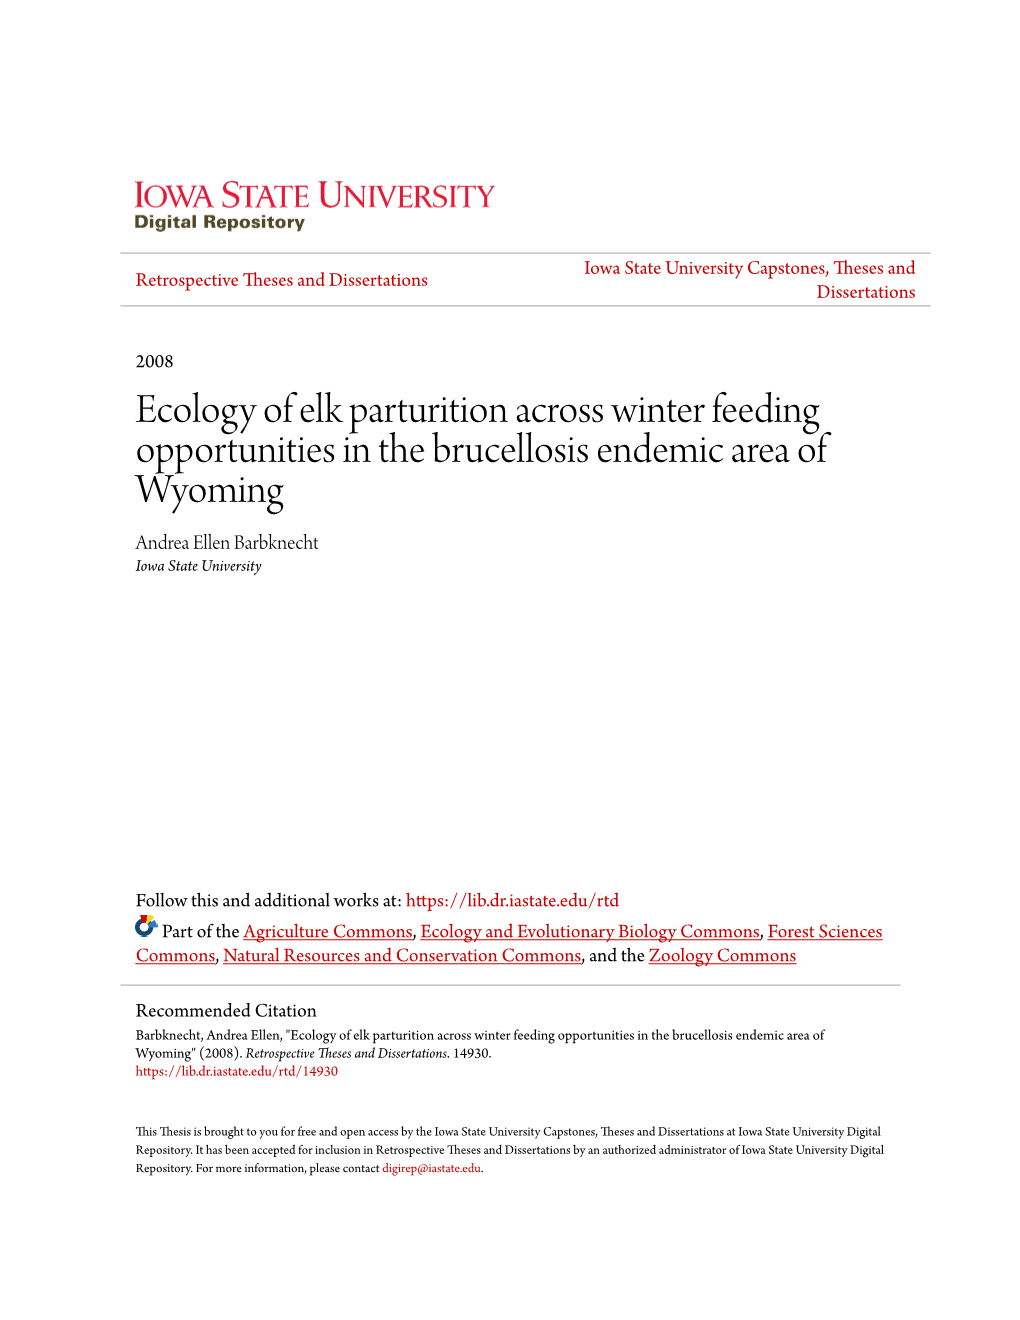 Ecology of Elk Parturition Across Winter Feeding Opportunities in the Brucellosis Endemic Area of Wyoming Andrea Ellen Barbknecht Iowa State University